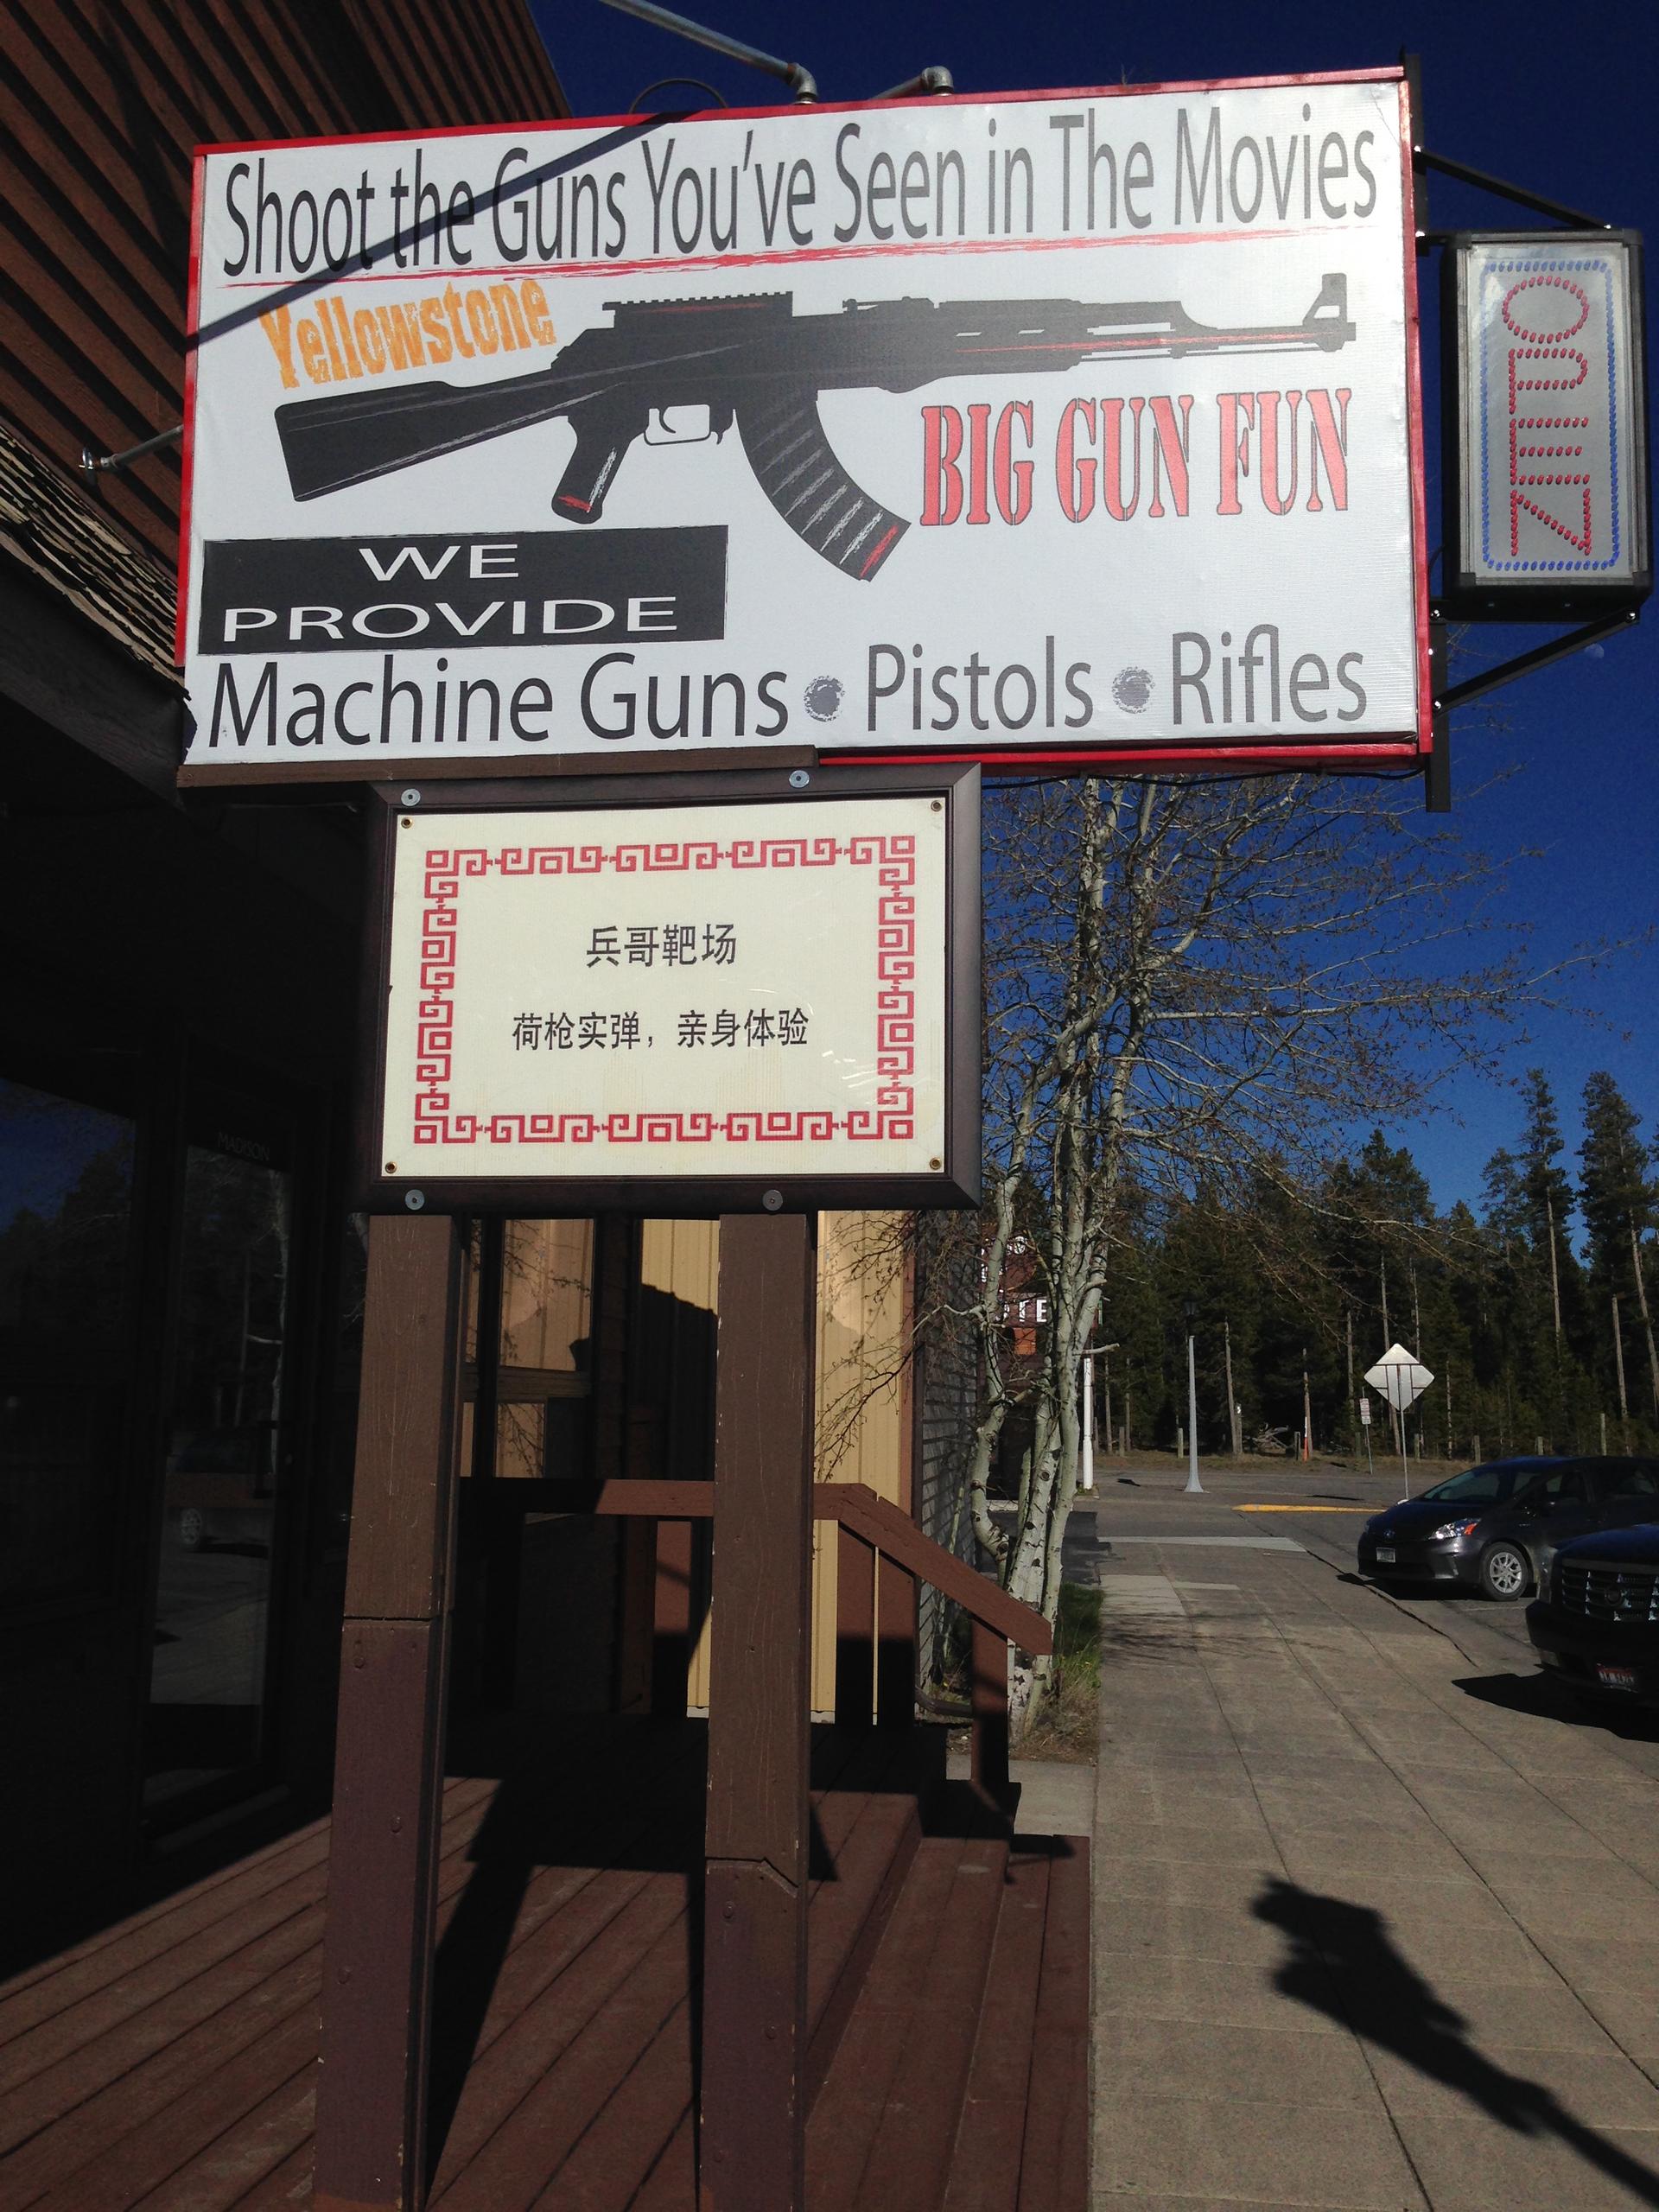 The Big Gun Fun shooting range in West Yellowstone, Montana. Owners Eric and Beverly Yarger were among the first to cash in the influx of Chinese tourists.